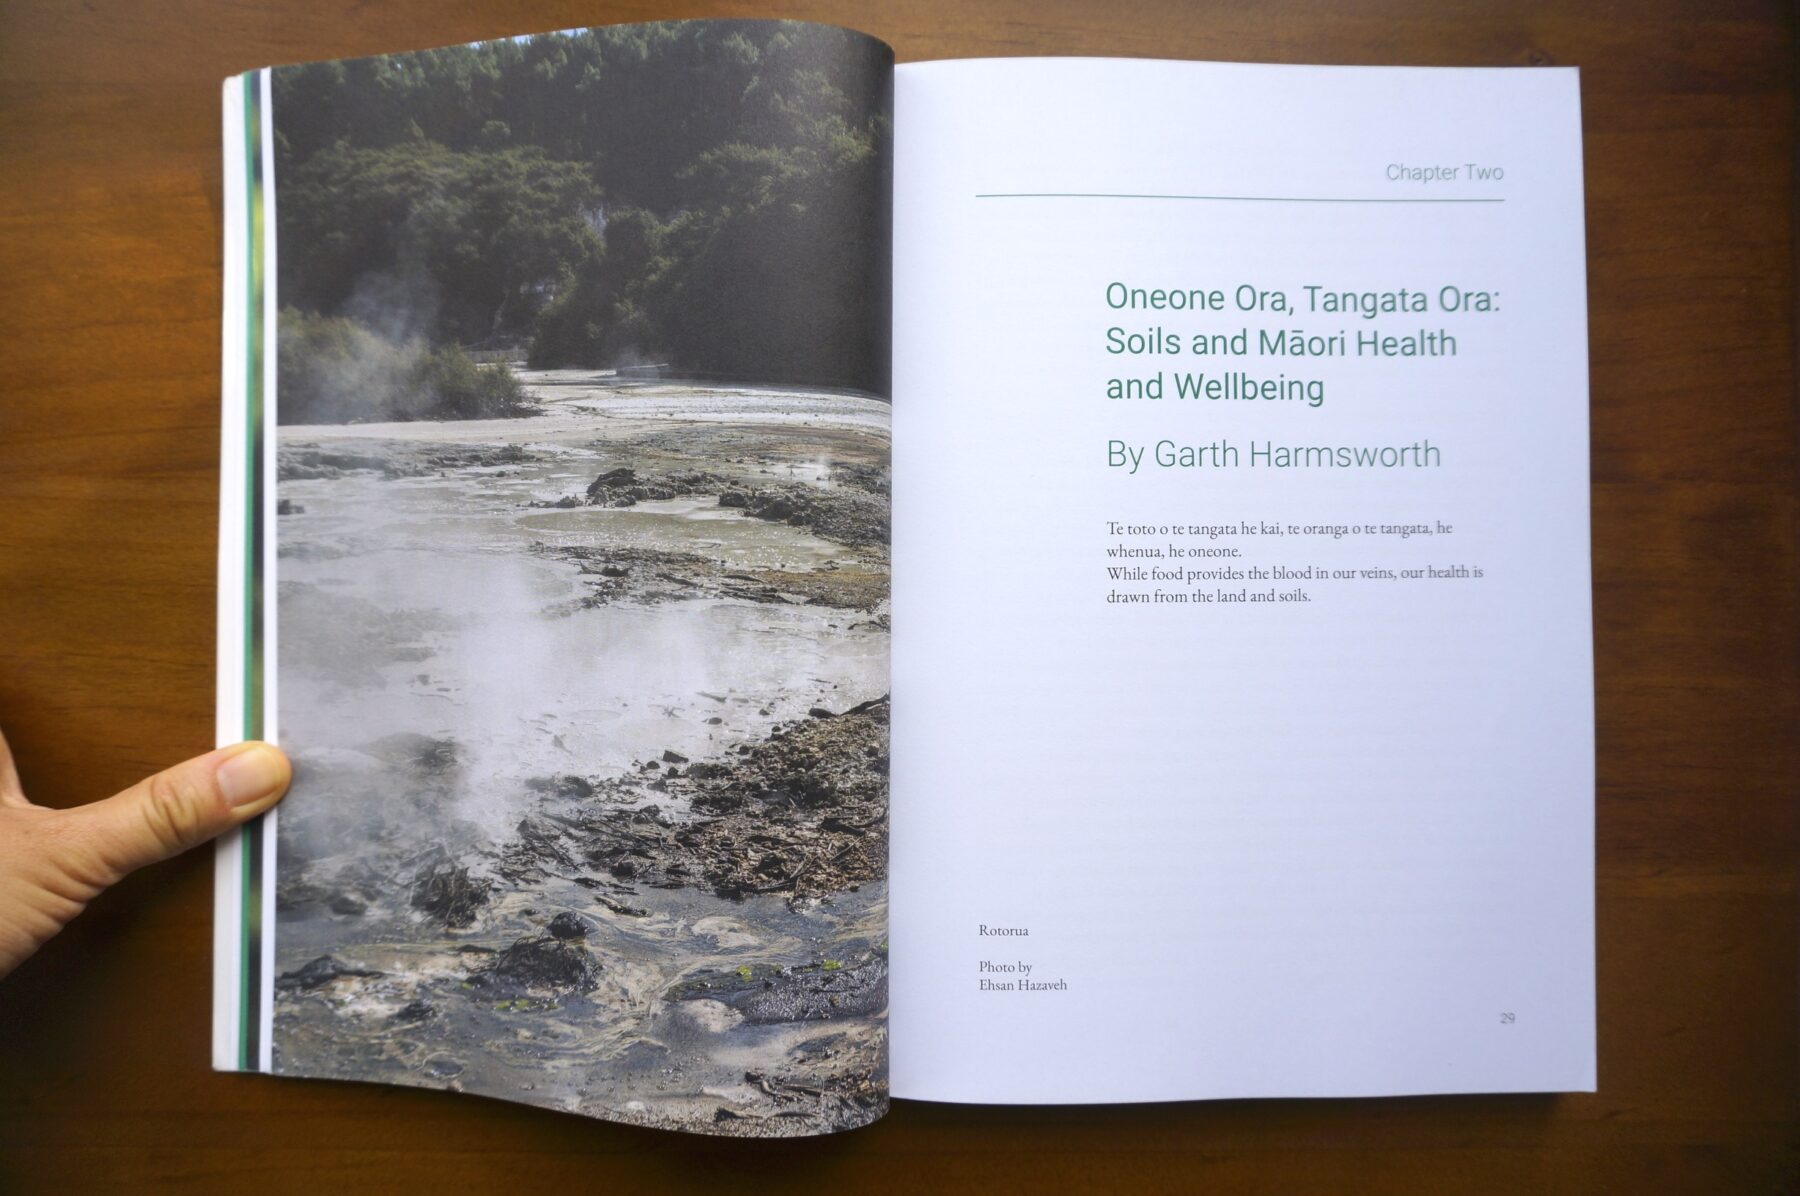 Reading Group: ‘Oneone Ora, Tangata Ora: Soils and Māori Health and Wellbeing’ by Garth Harmsworth